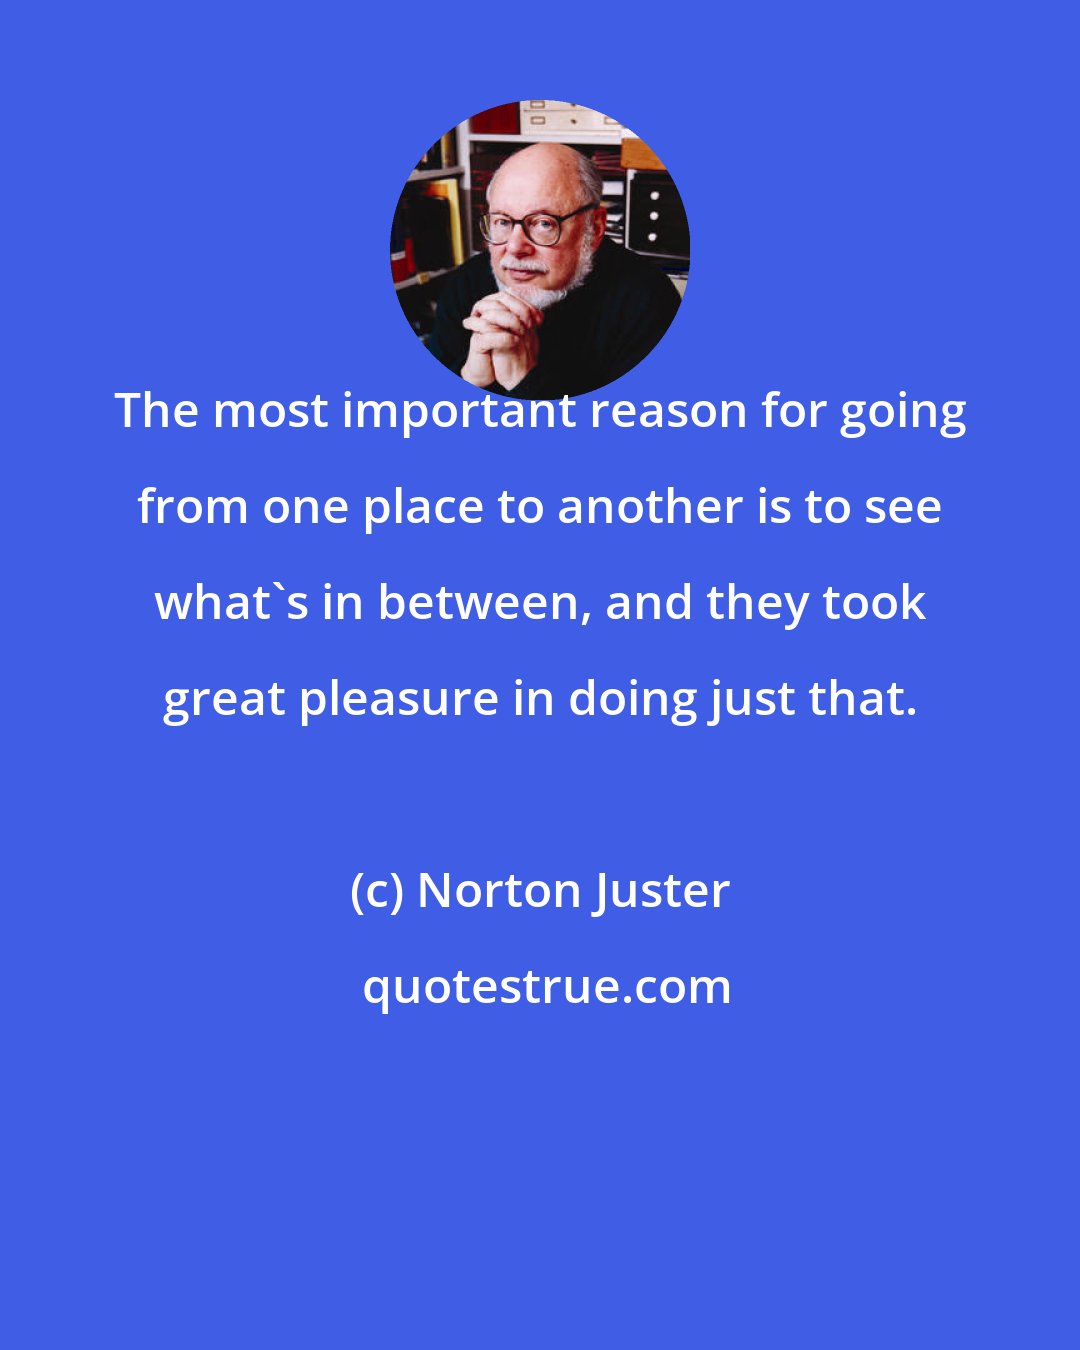 Norton Juster: The most important reason for going from one place to another is to see what's in between, and they took great pleasure in doing just that.